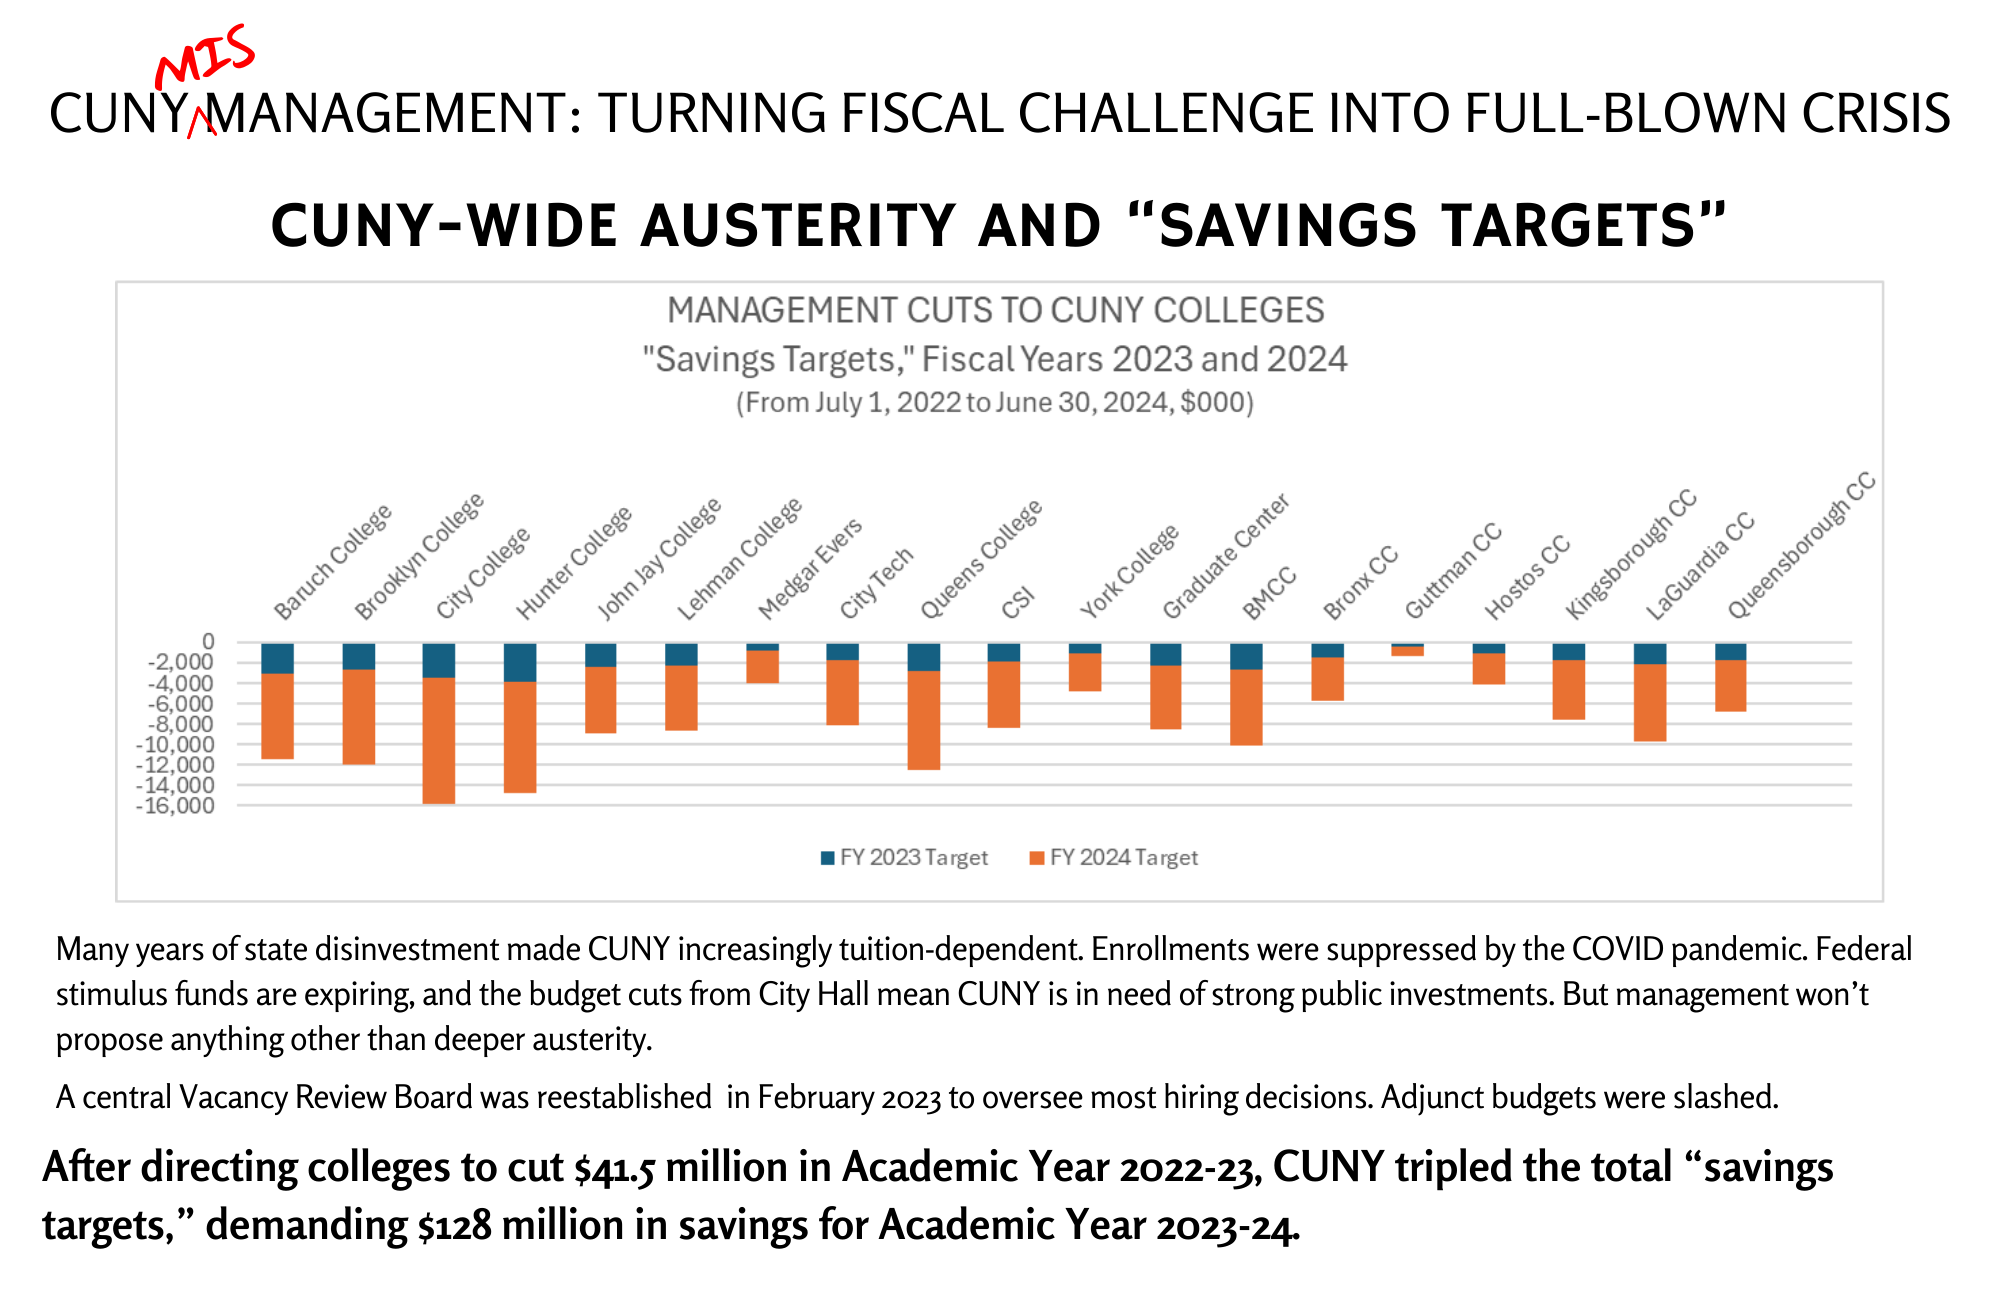 Many years of state disinvestment made CUNY increasingly tuition-dependent. Enrollments were suppressed by the COVID pandemic. Federal stimulus funds are expiring, and the budget cuts from City Hall mean CUNY is in need of strong public investments. But management won’t propose anything other than deeper austerity.